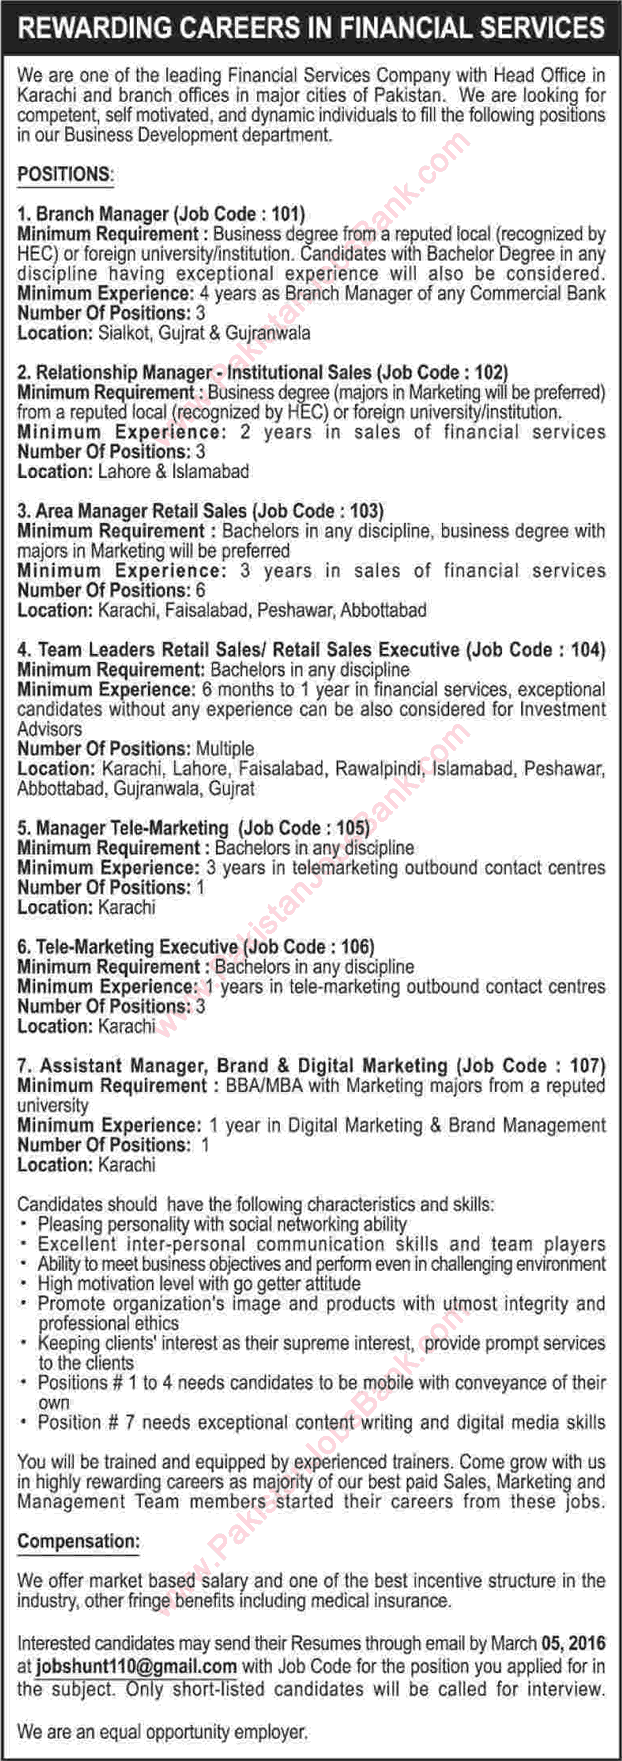 Financial Services Company Jobs in Pakistan 2016 February / March Business Development Staff Latest